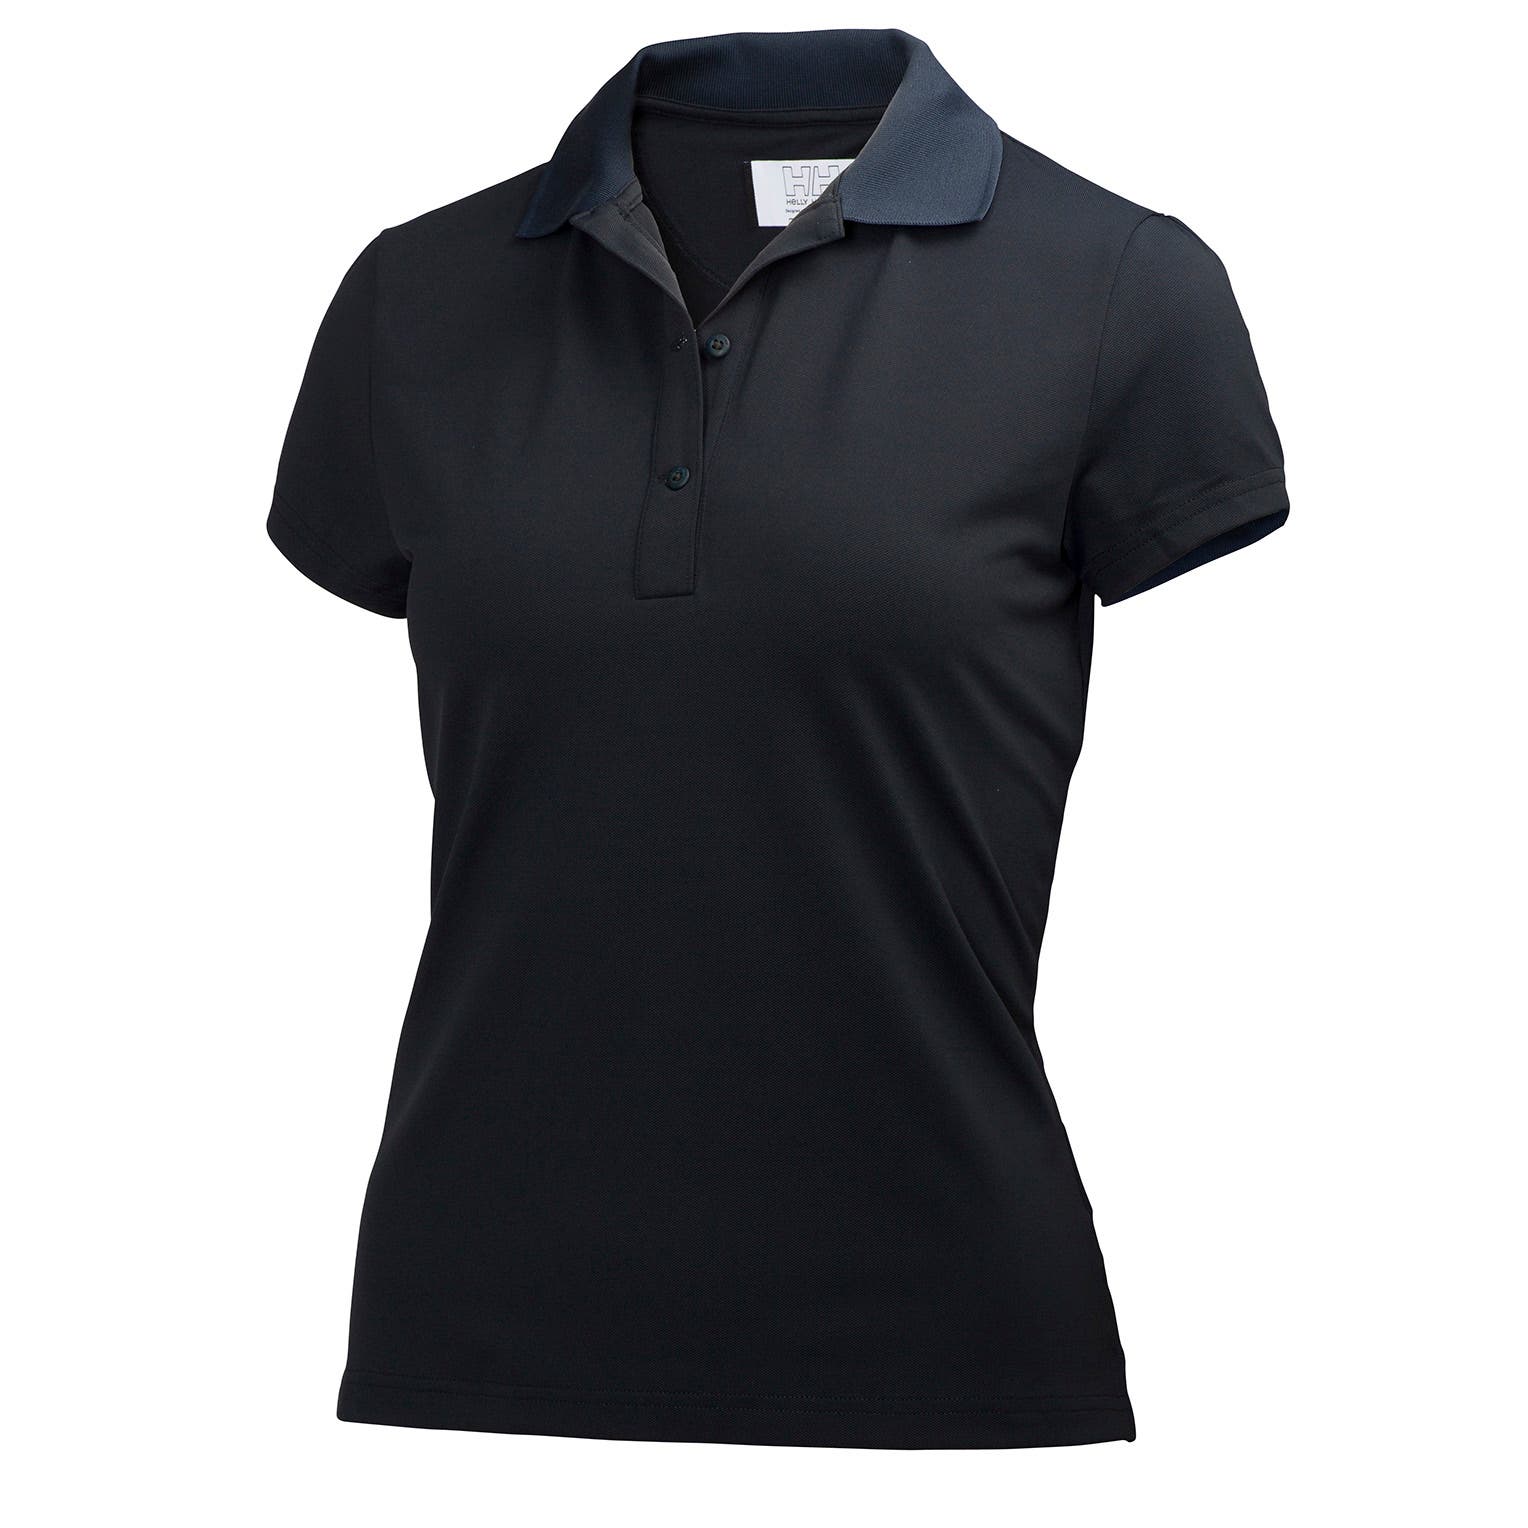 Helly Hansen Women's Tech Crew Polo in Navy from the front